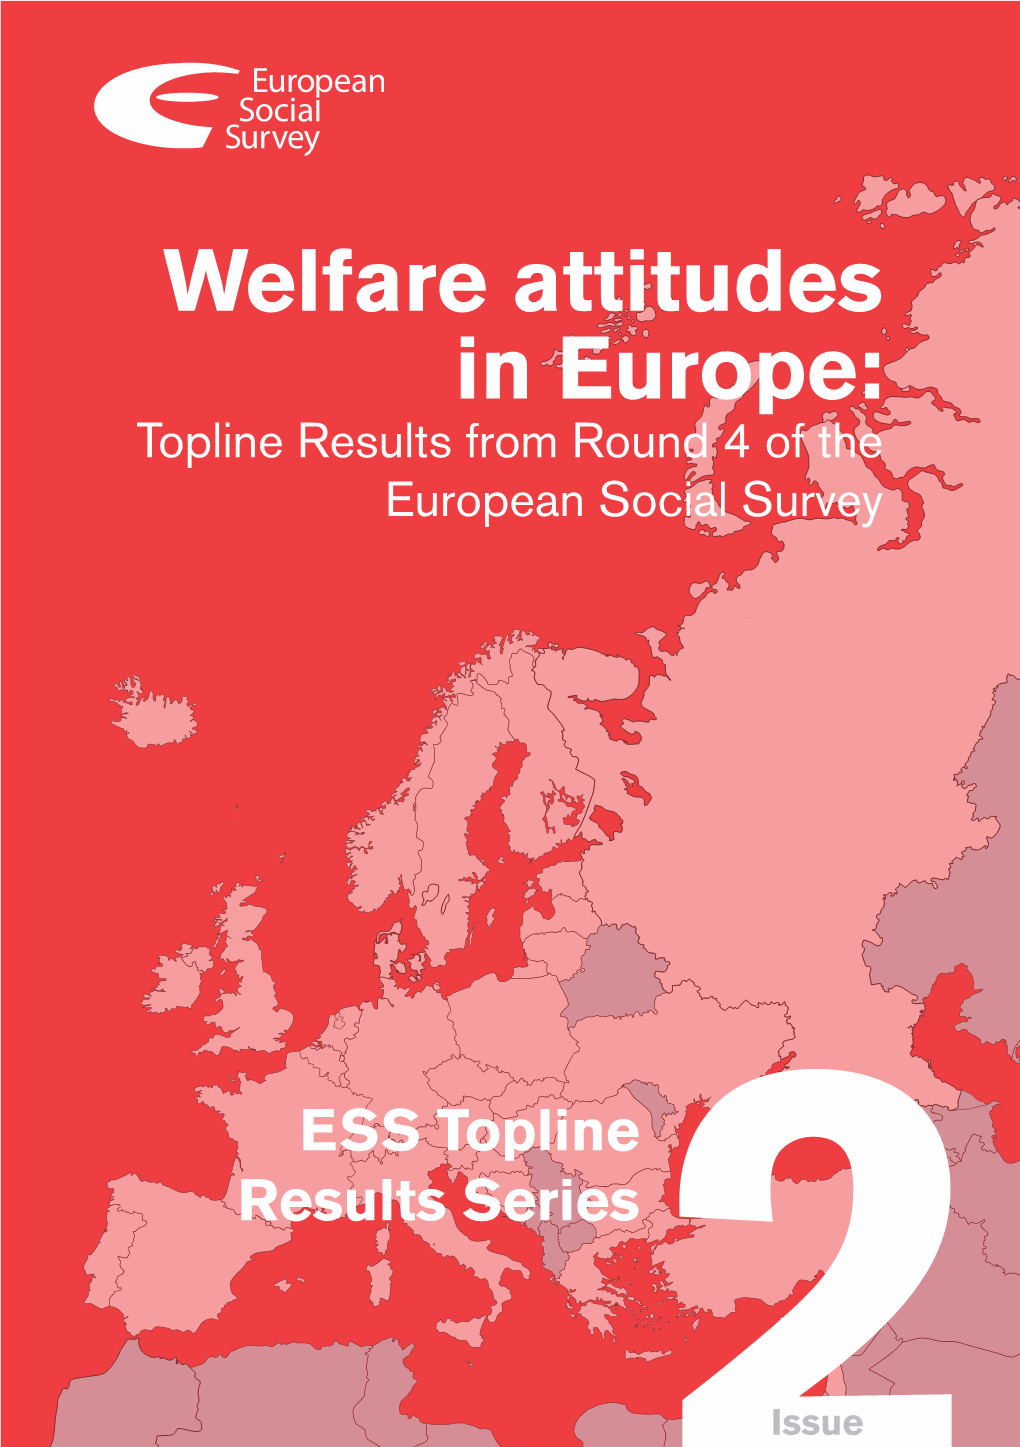 Welfare Attitudes in Europe: Topline Results from Round 4 of the European Social Survey